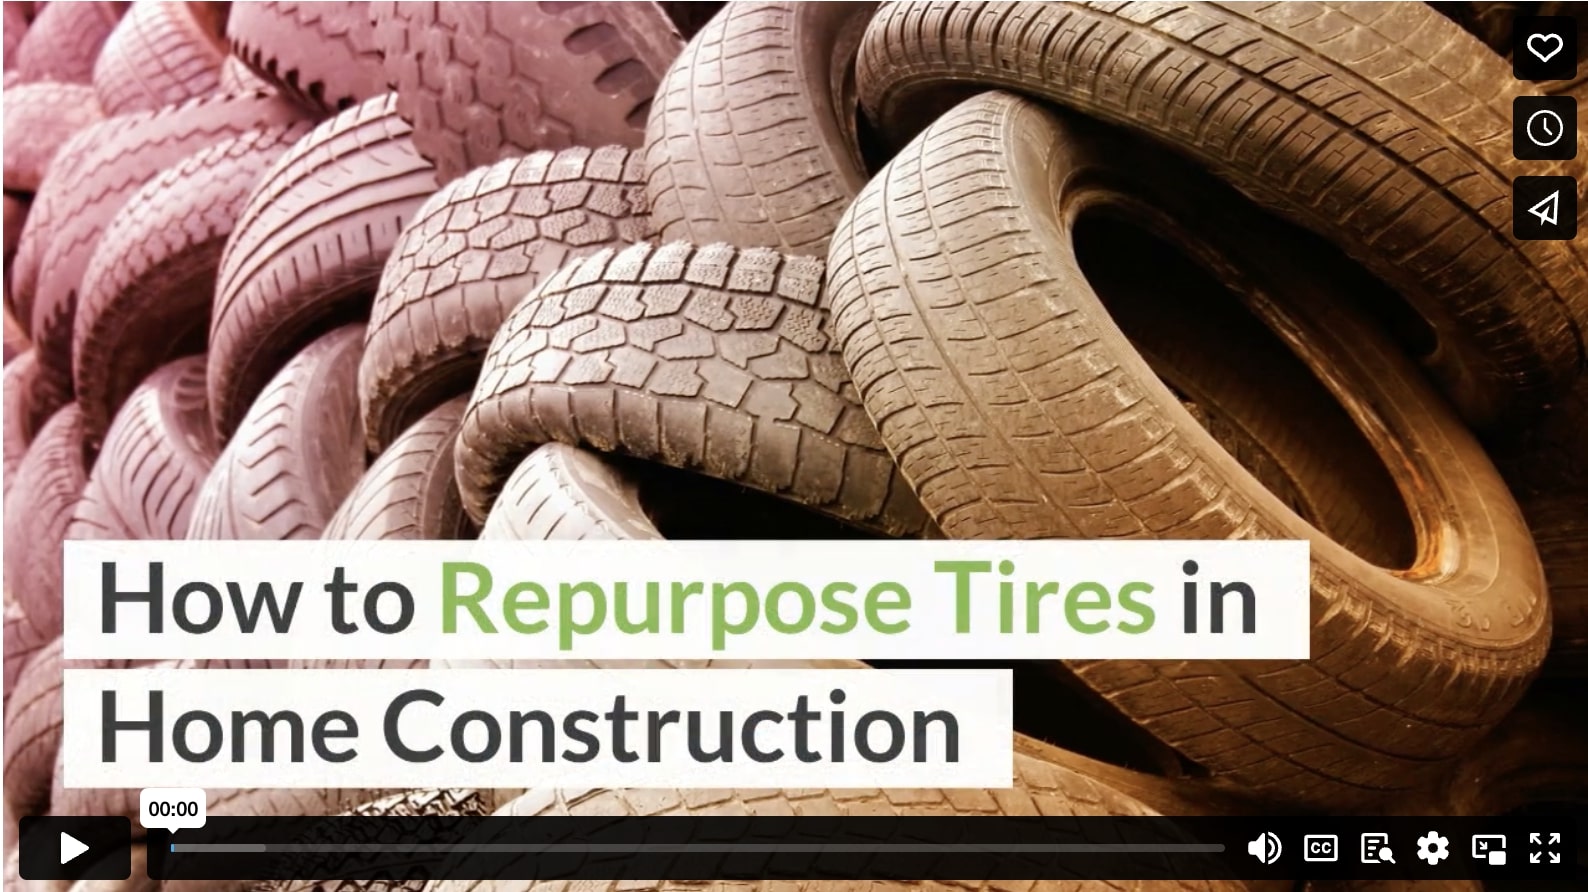 How to Repurpose Tires in Home Construction